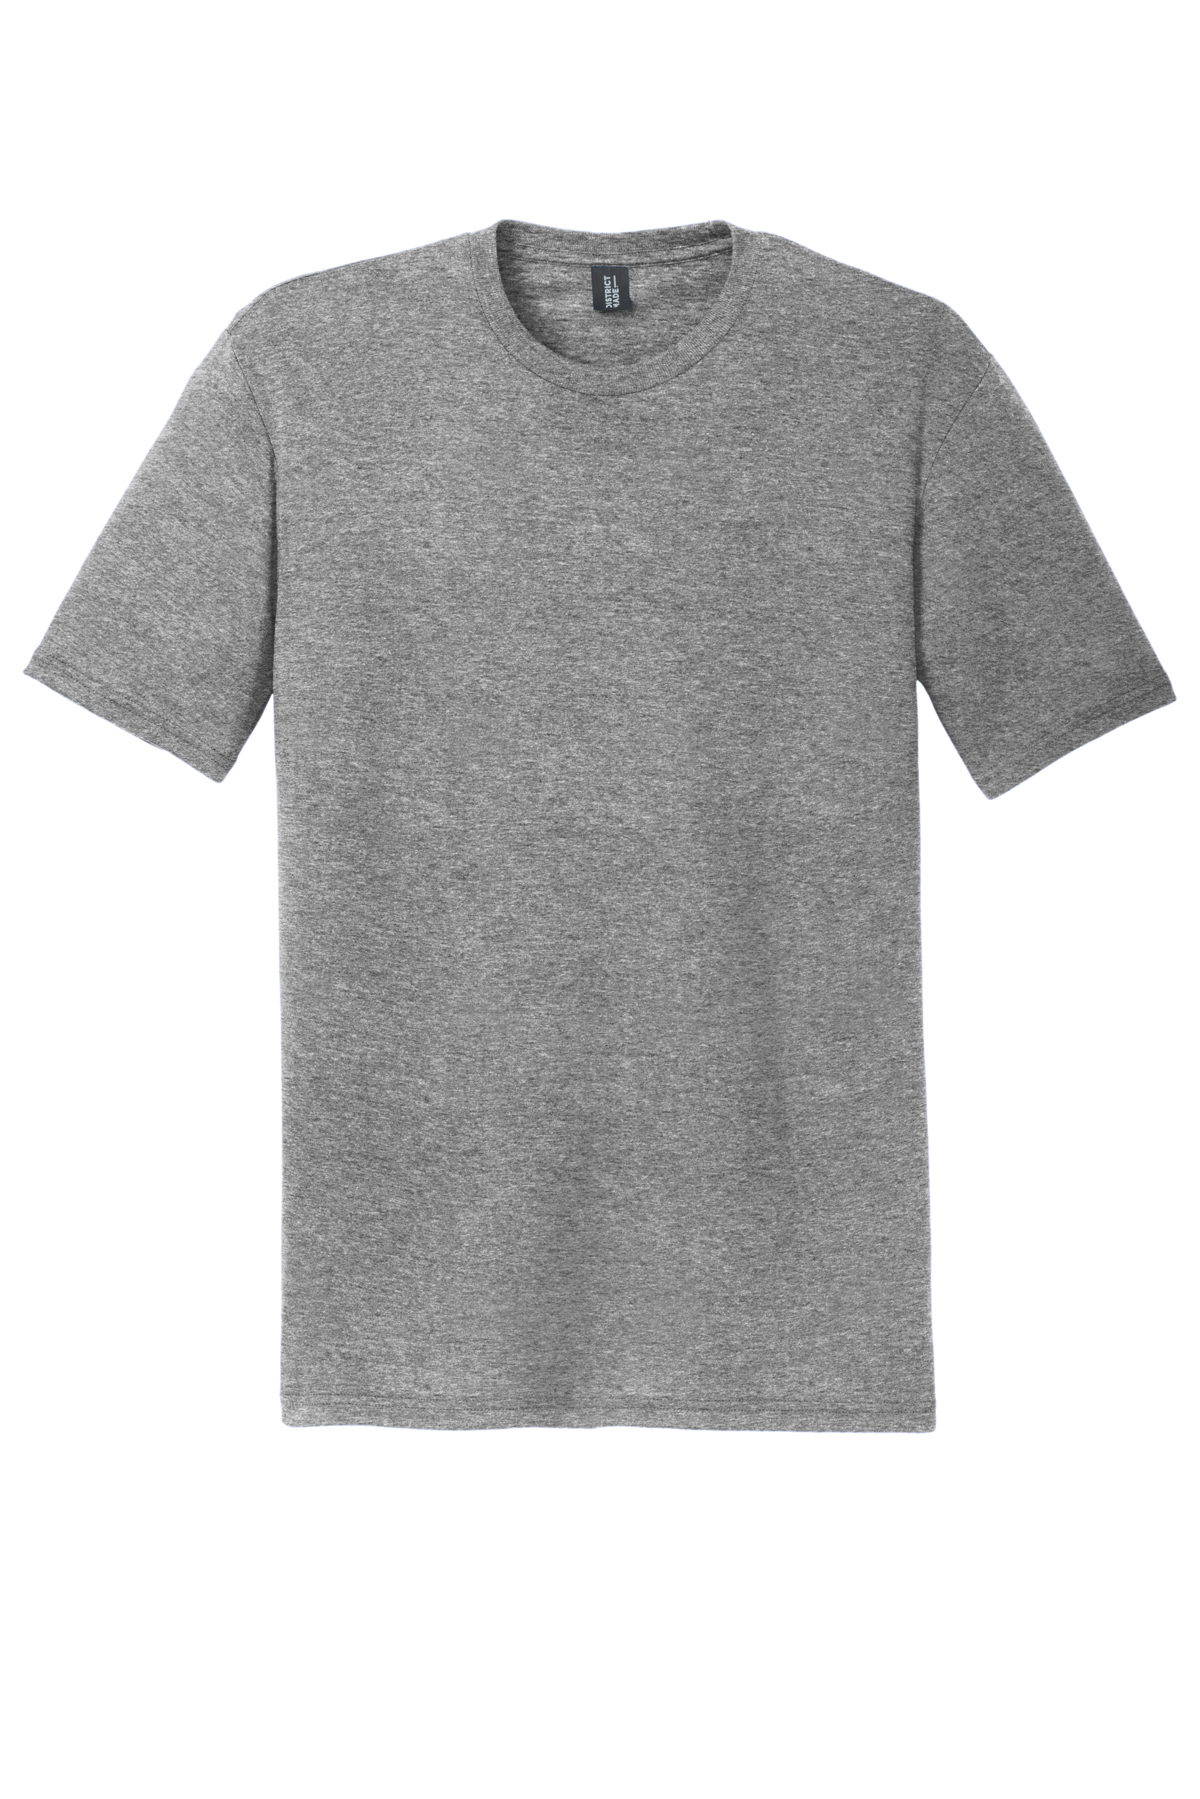 District Perfect Tri Tee | Product | District